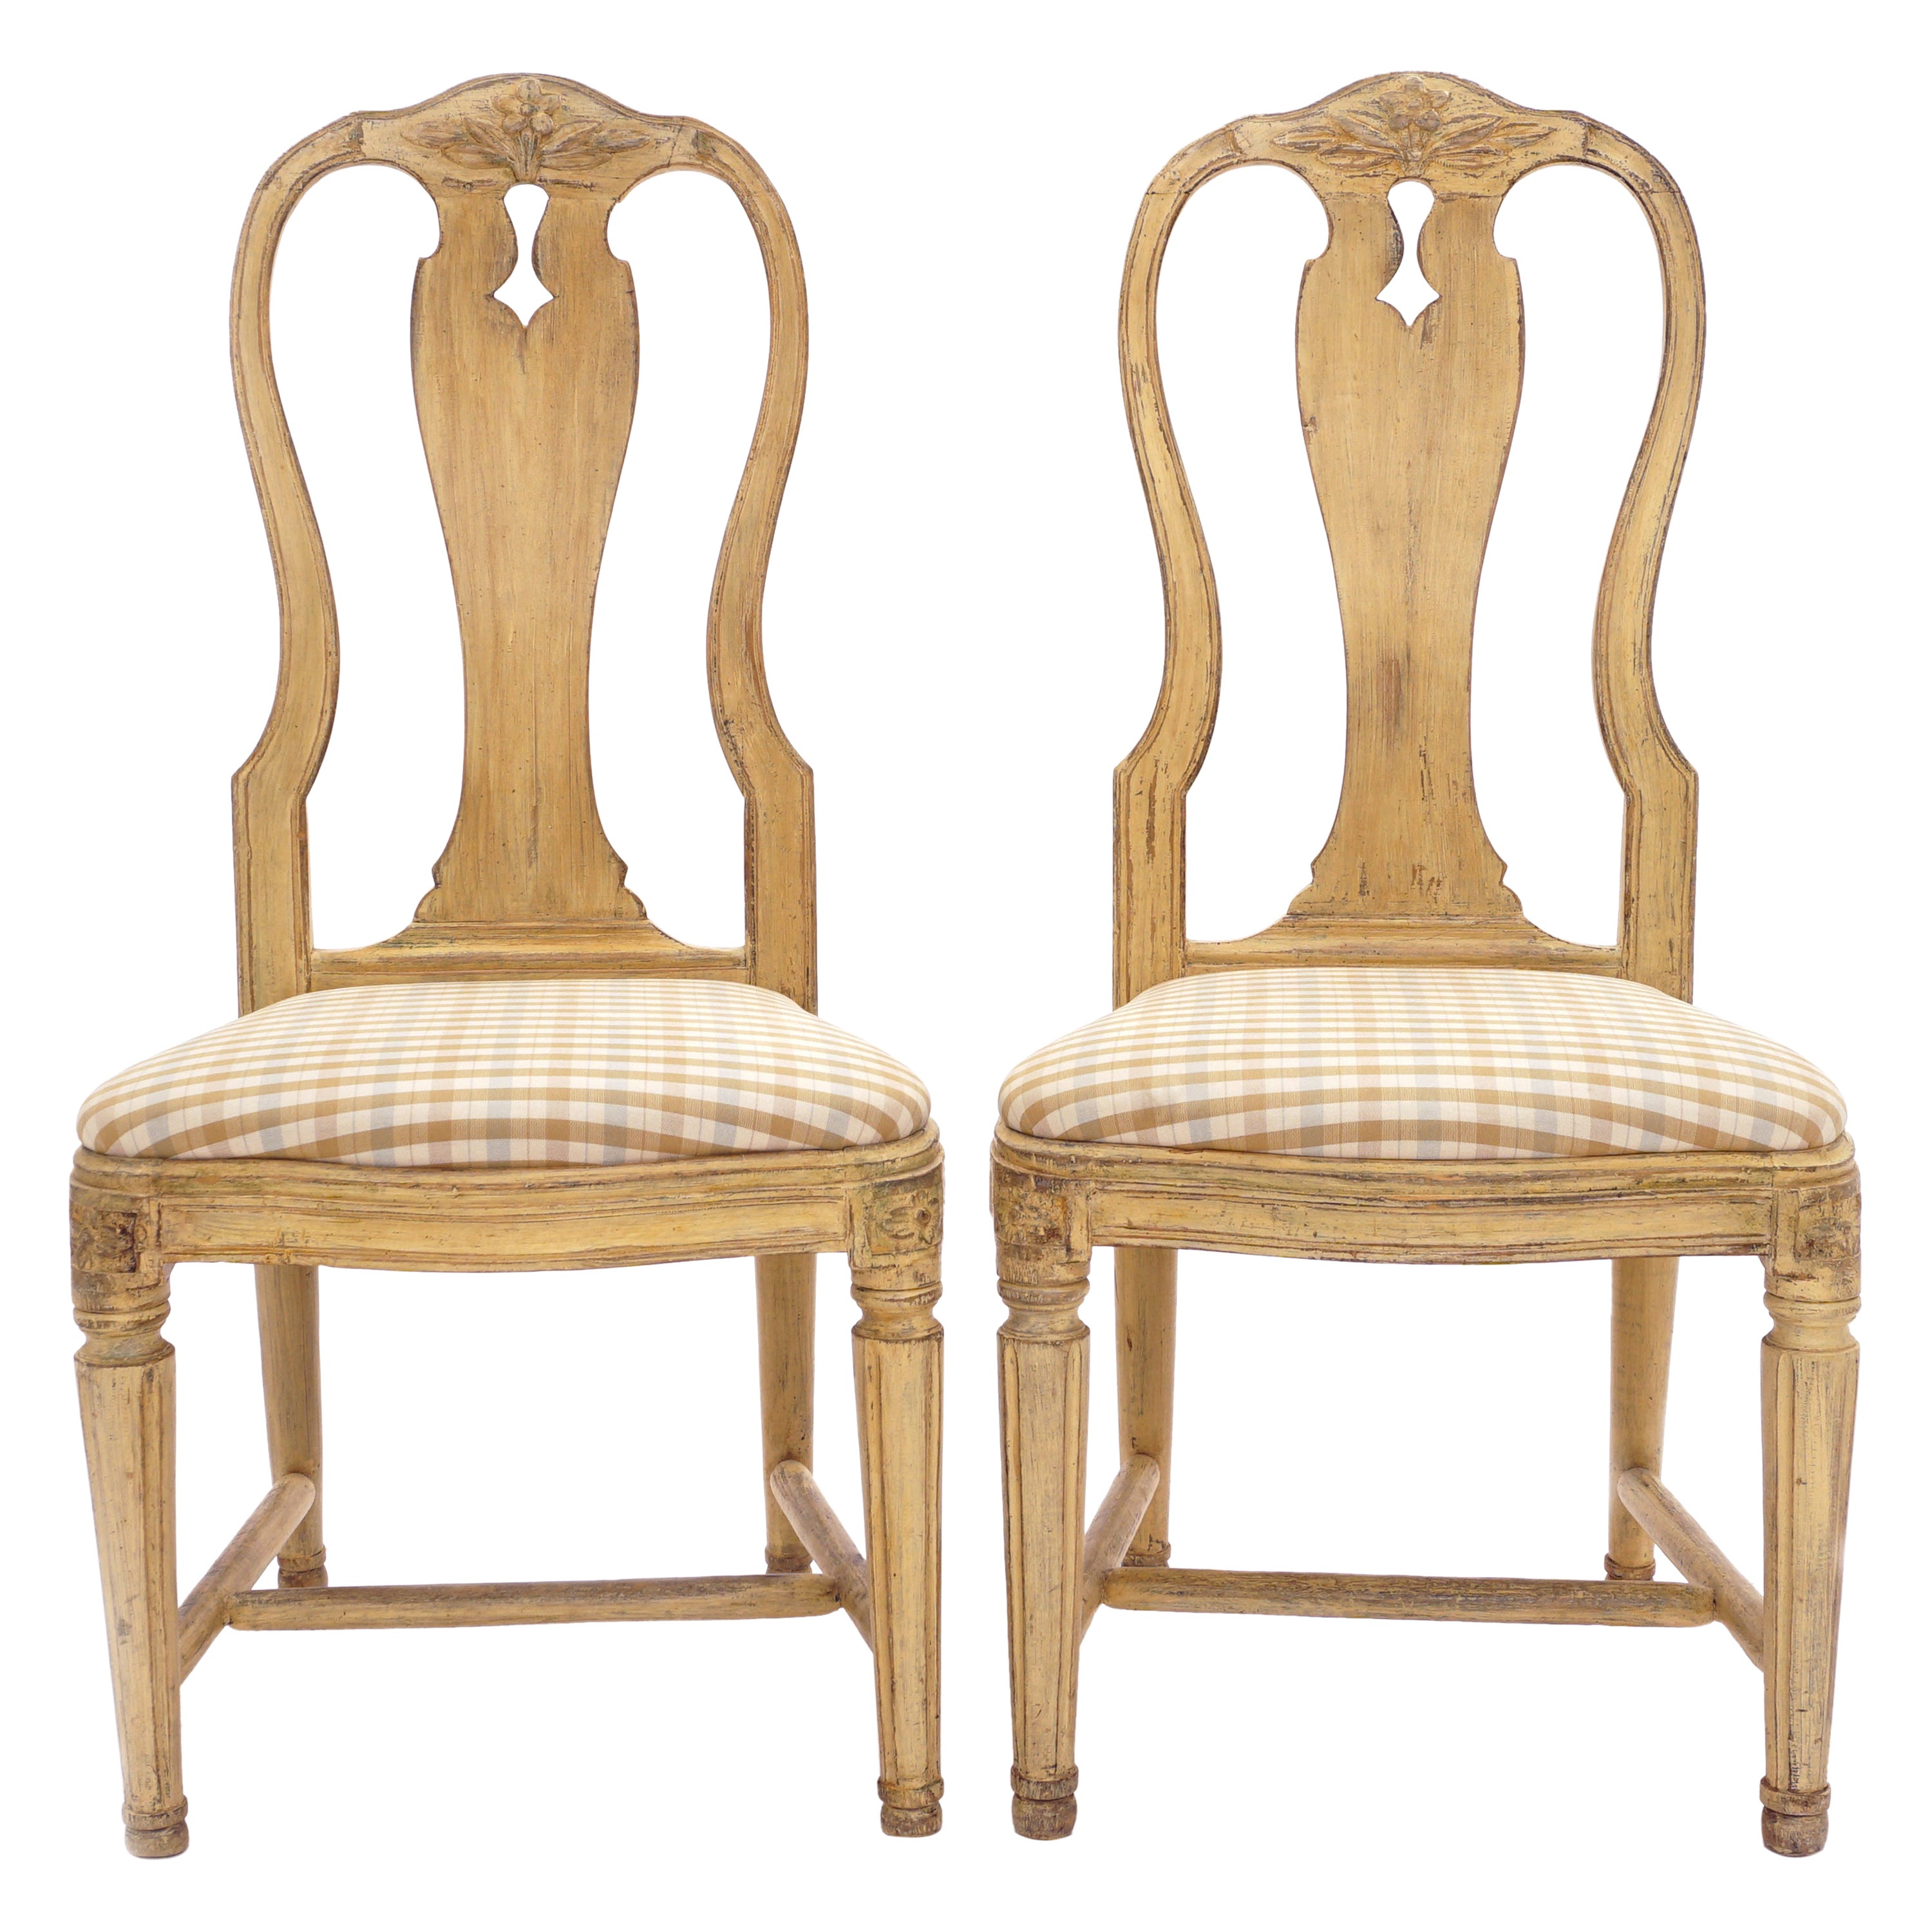 Late 18th Century Swedish Pair Og Gustavian Chairs, Sweden, circa 1780-1800 For Sale